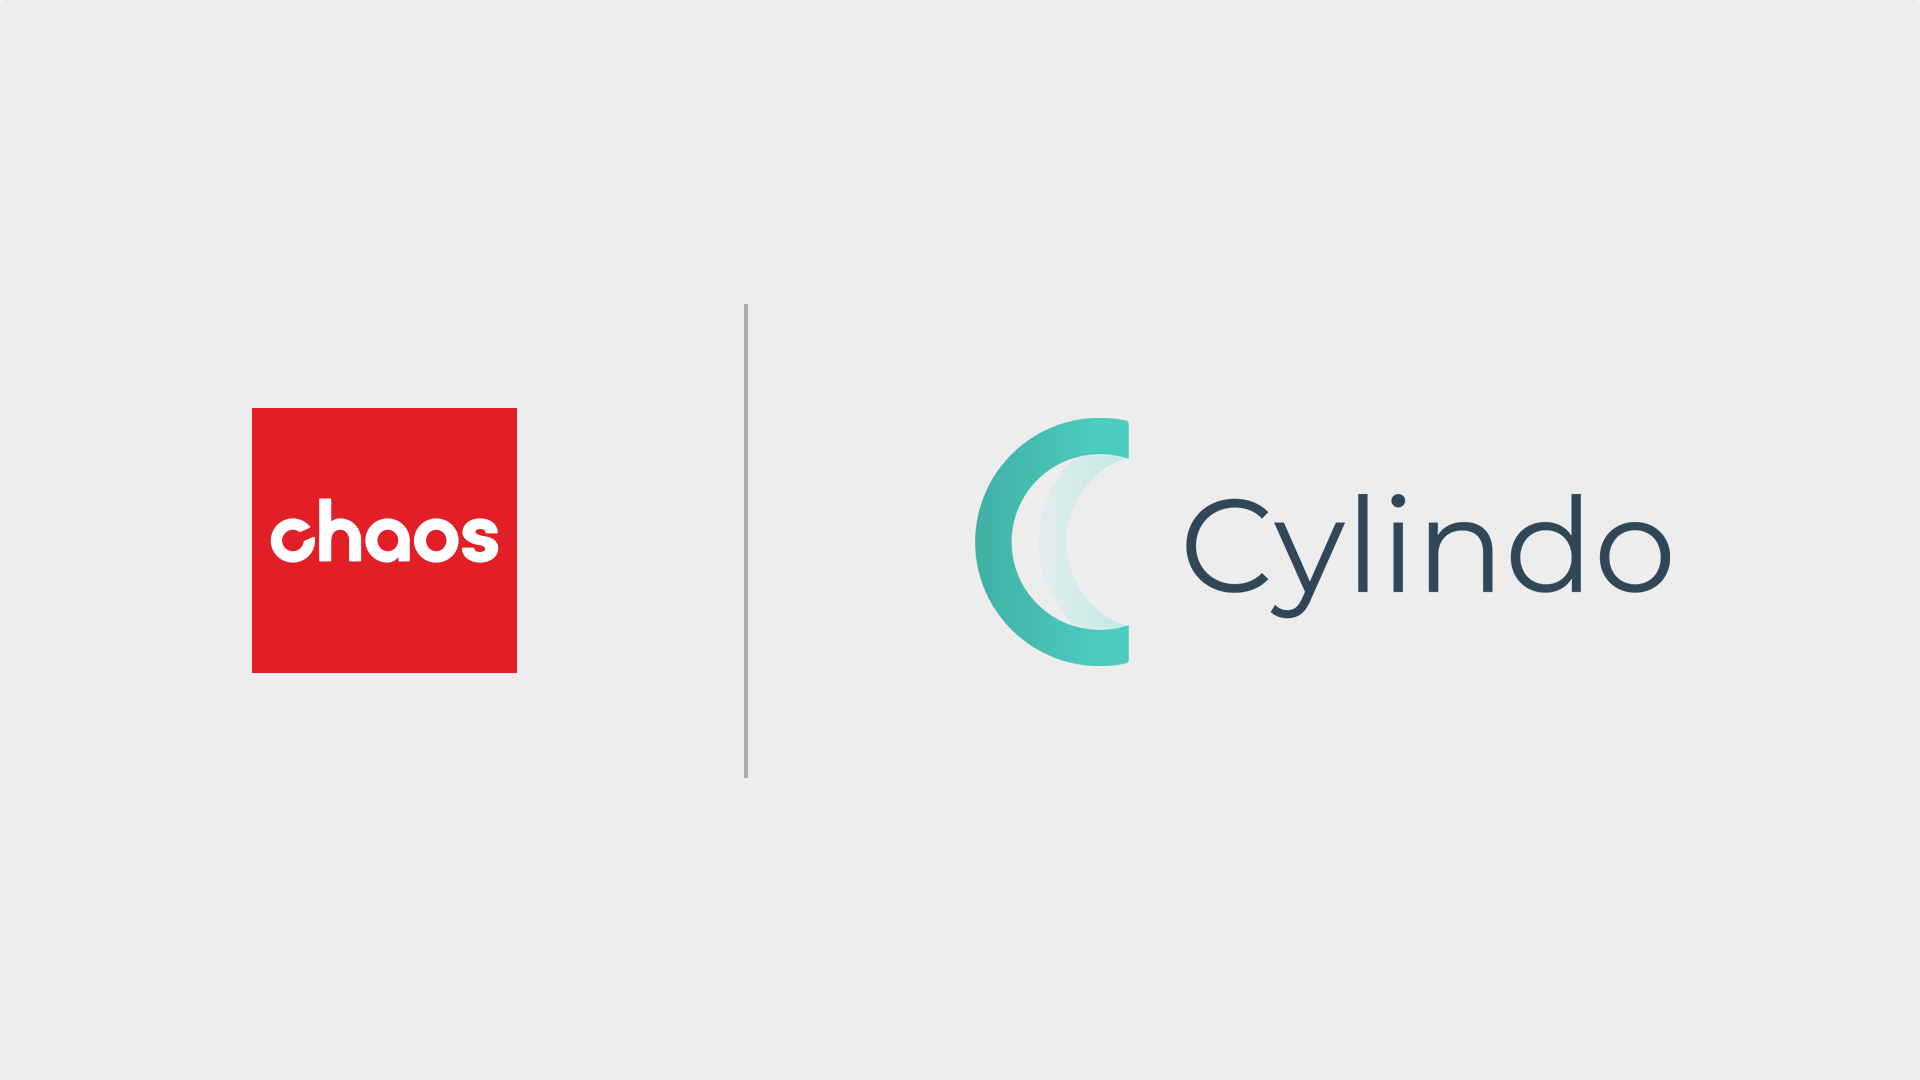 Cylindo Joins Chaos To Create an End-to-End Platform for Visualization, 3D Commerce and Beyond